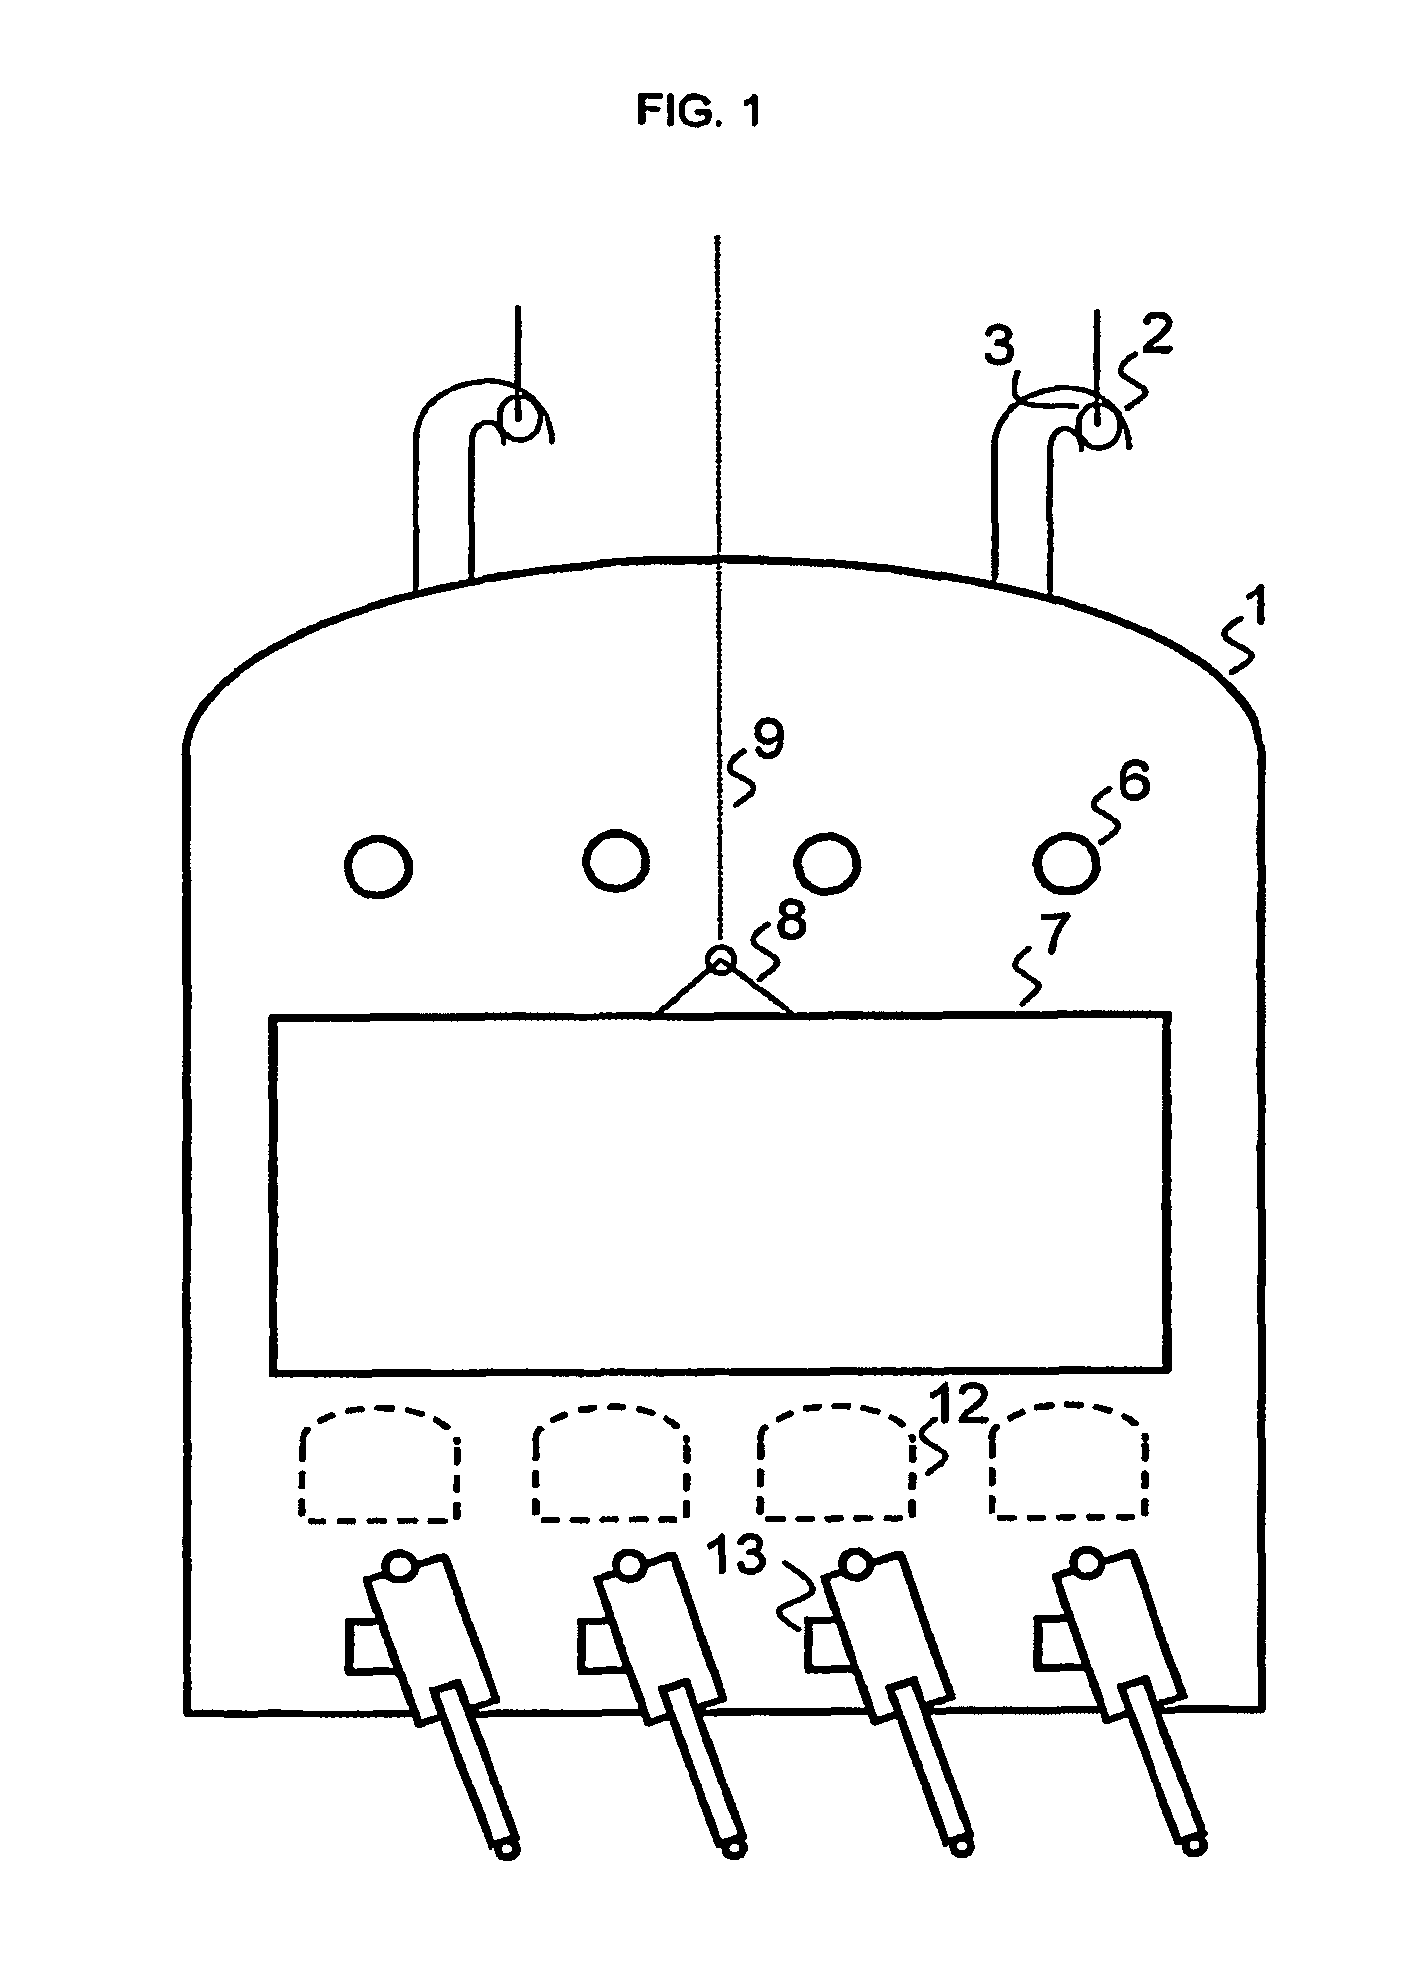 Device for feeding combustion air or gas influencing coal carbonization into the upper area of coke ovens